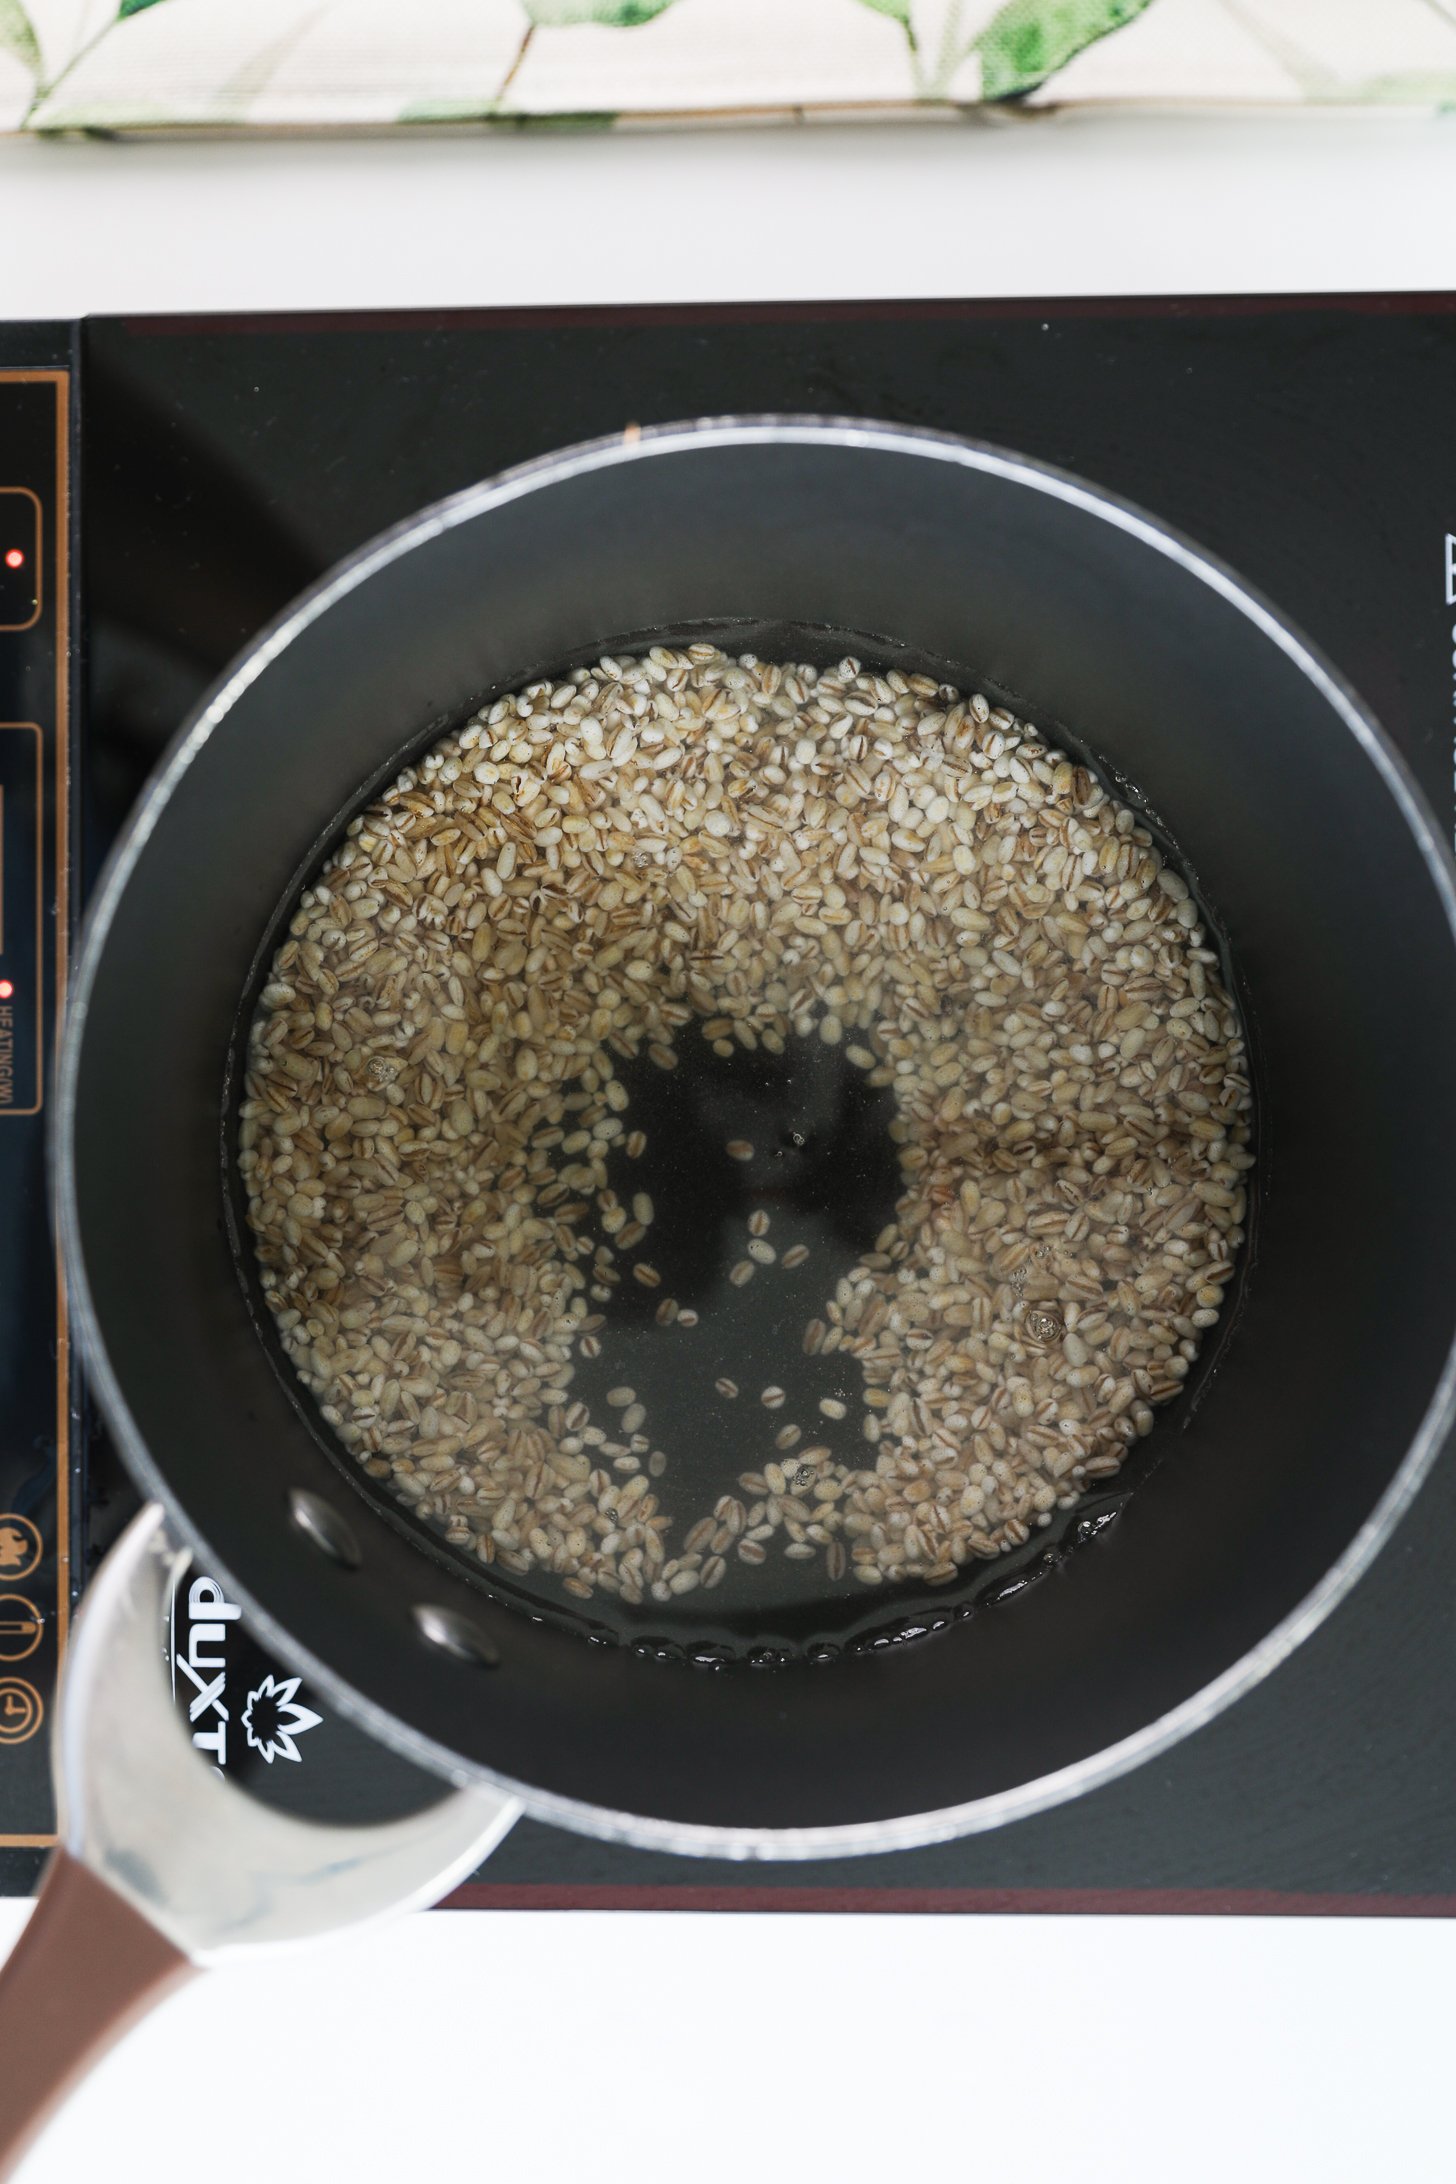 Saucepan with barley submerged in water on a mobile cooktop.